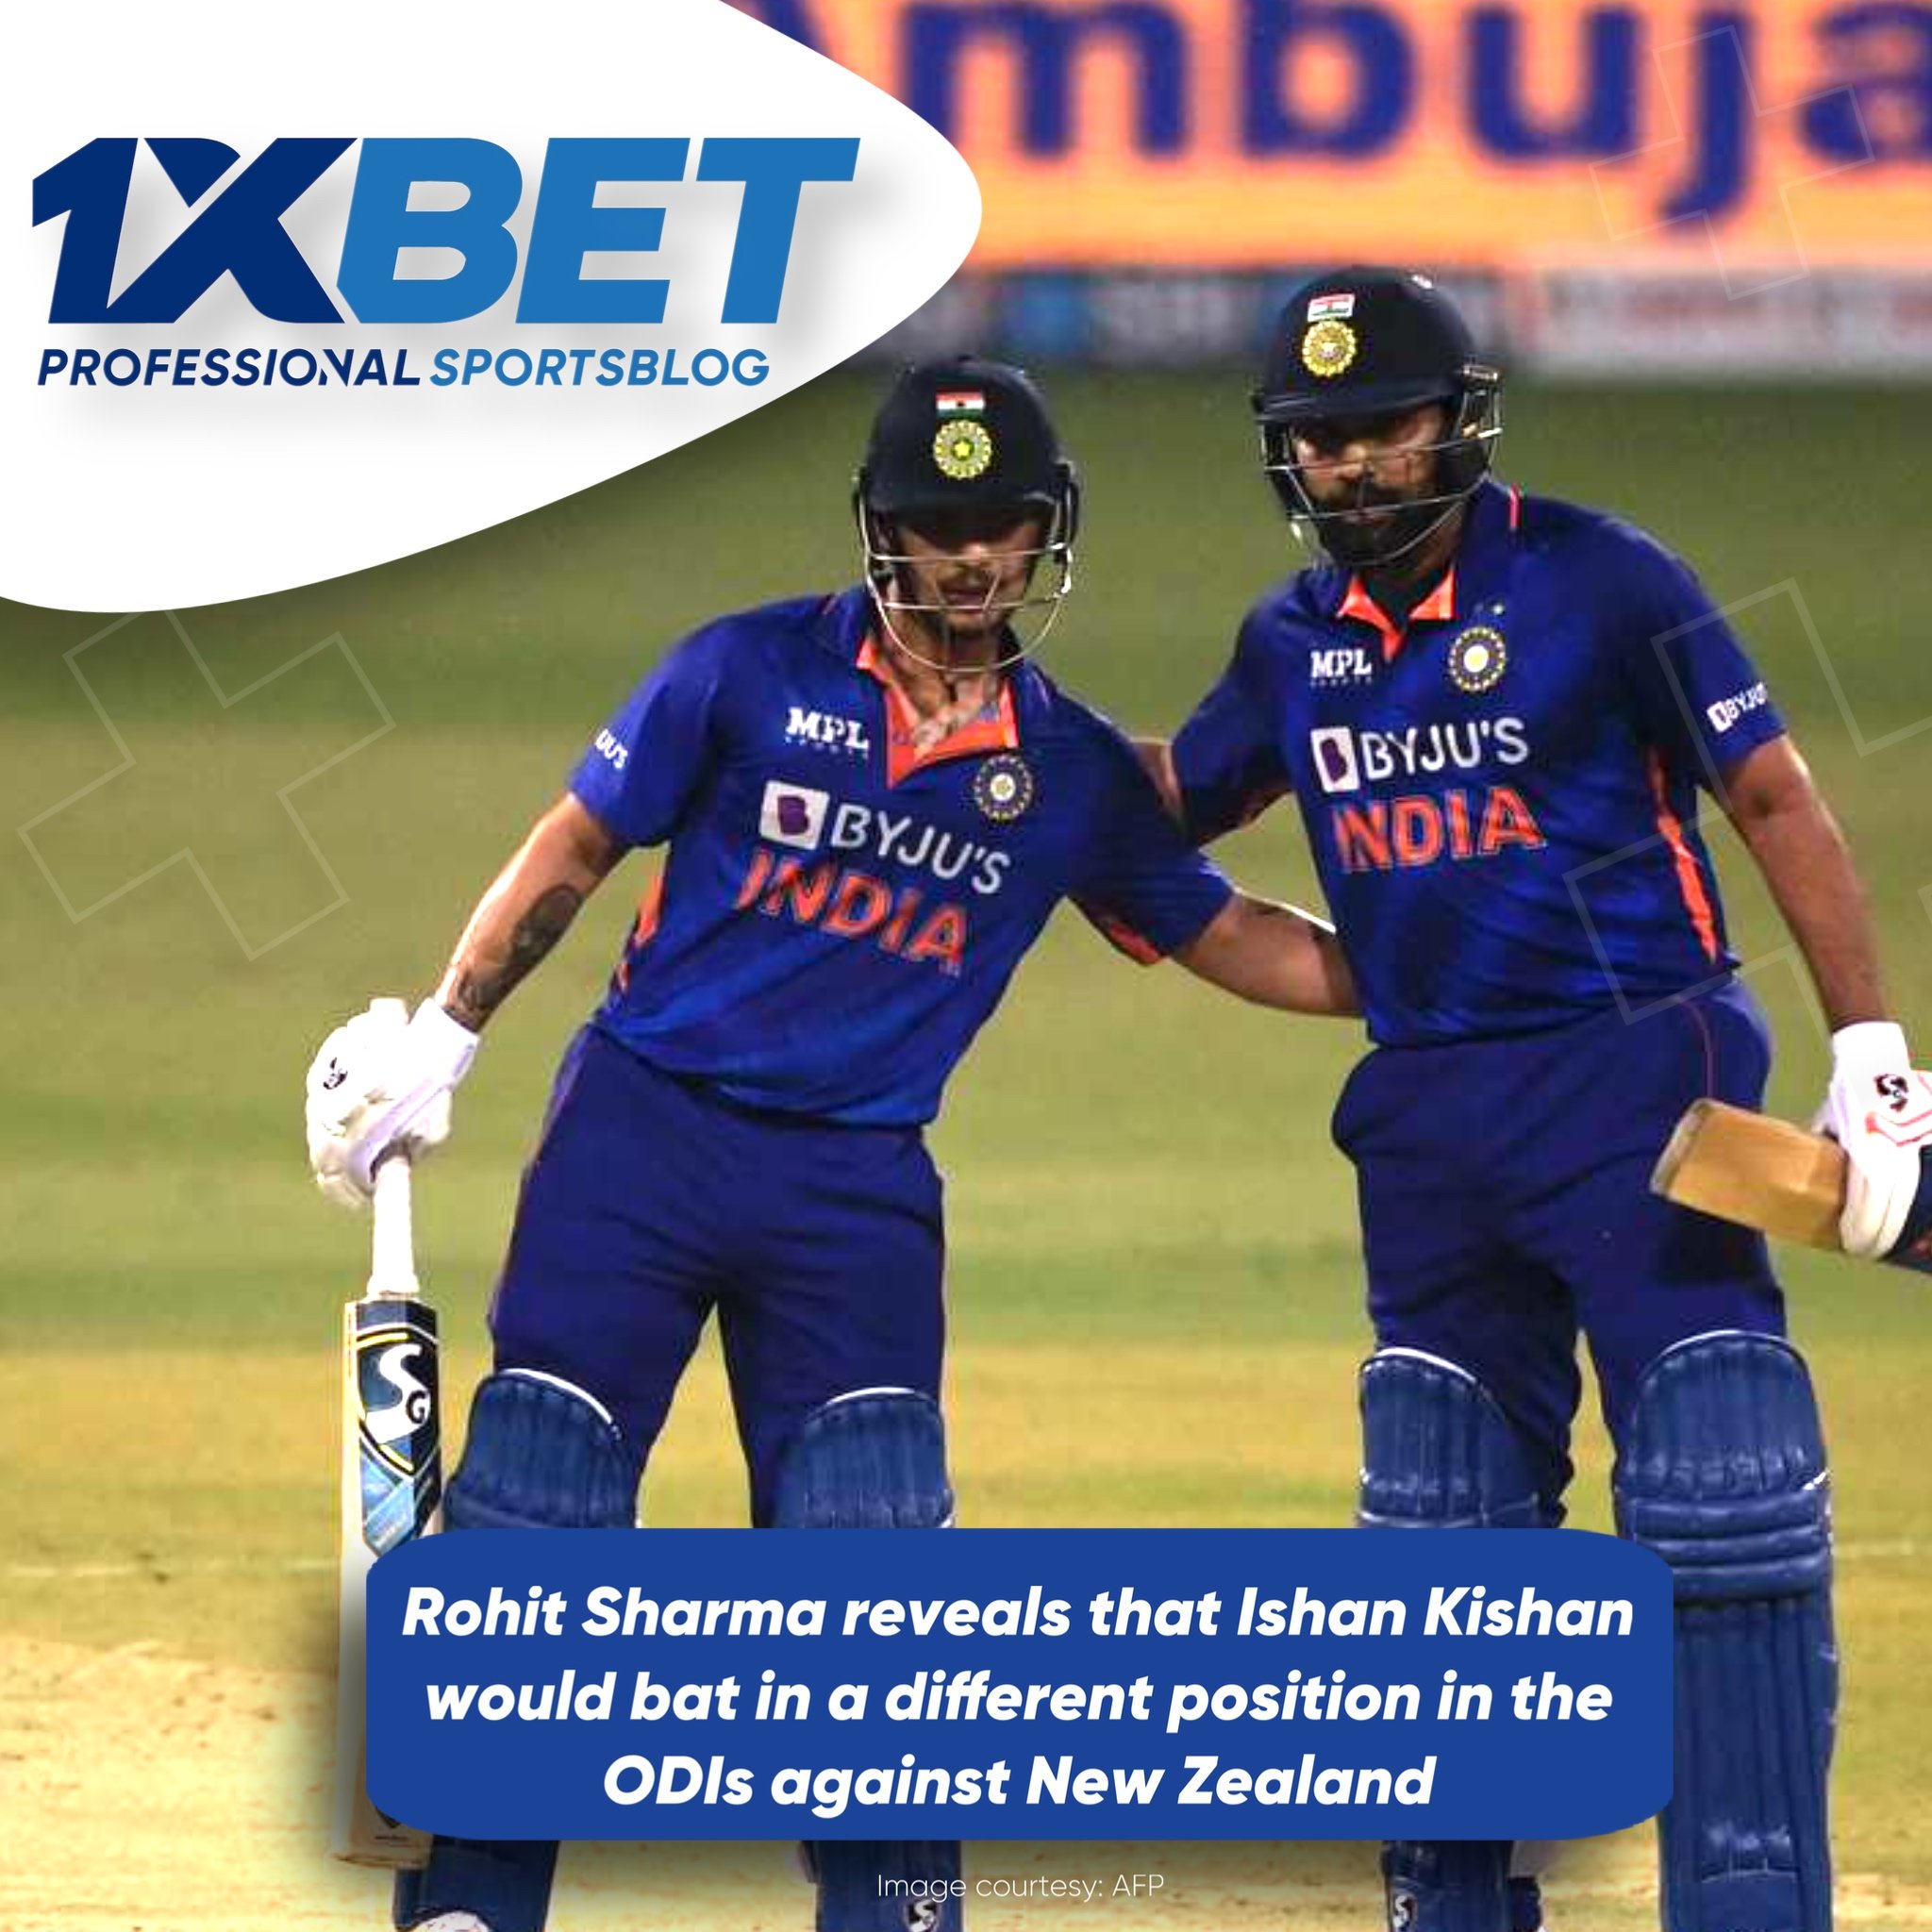 Rohit Sharma reveals that Ishan Kishan would bat in a different position in the ODIs against New Zealand